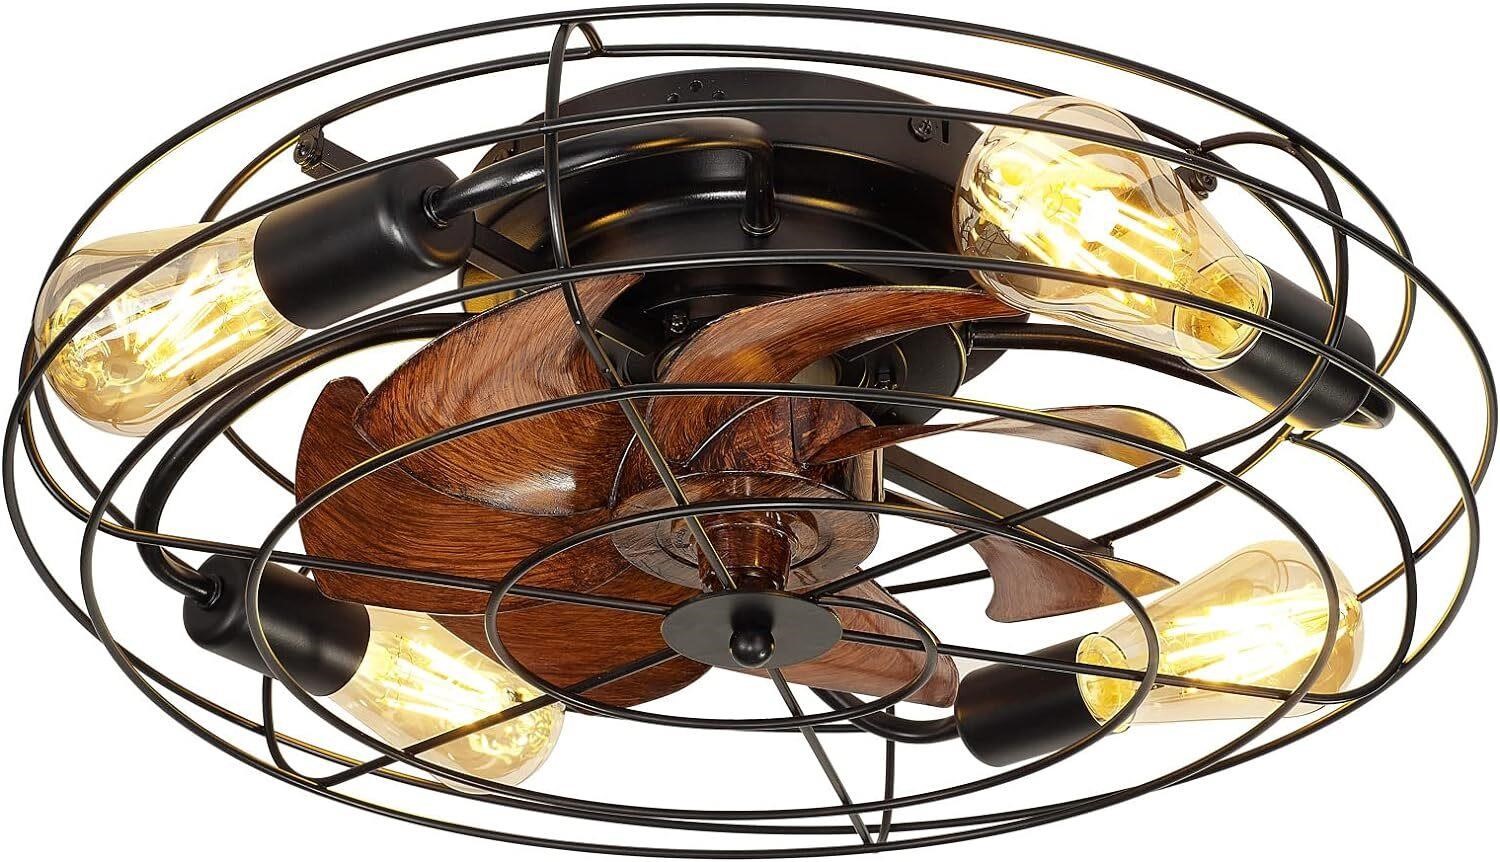 19.7 Caged Ceiling Fan with Light  Bladeless